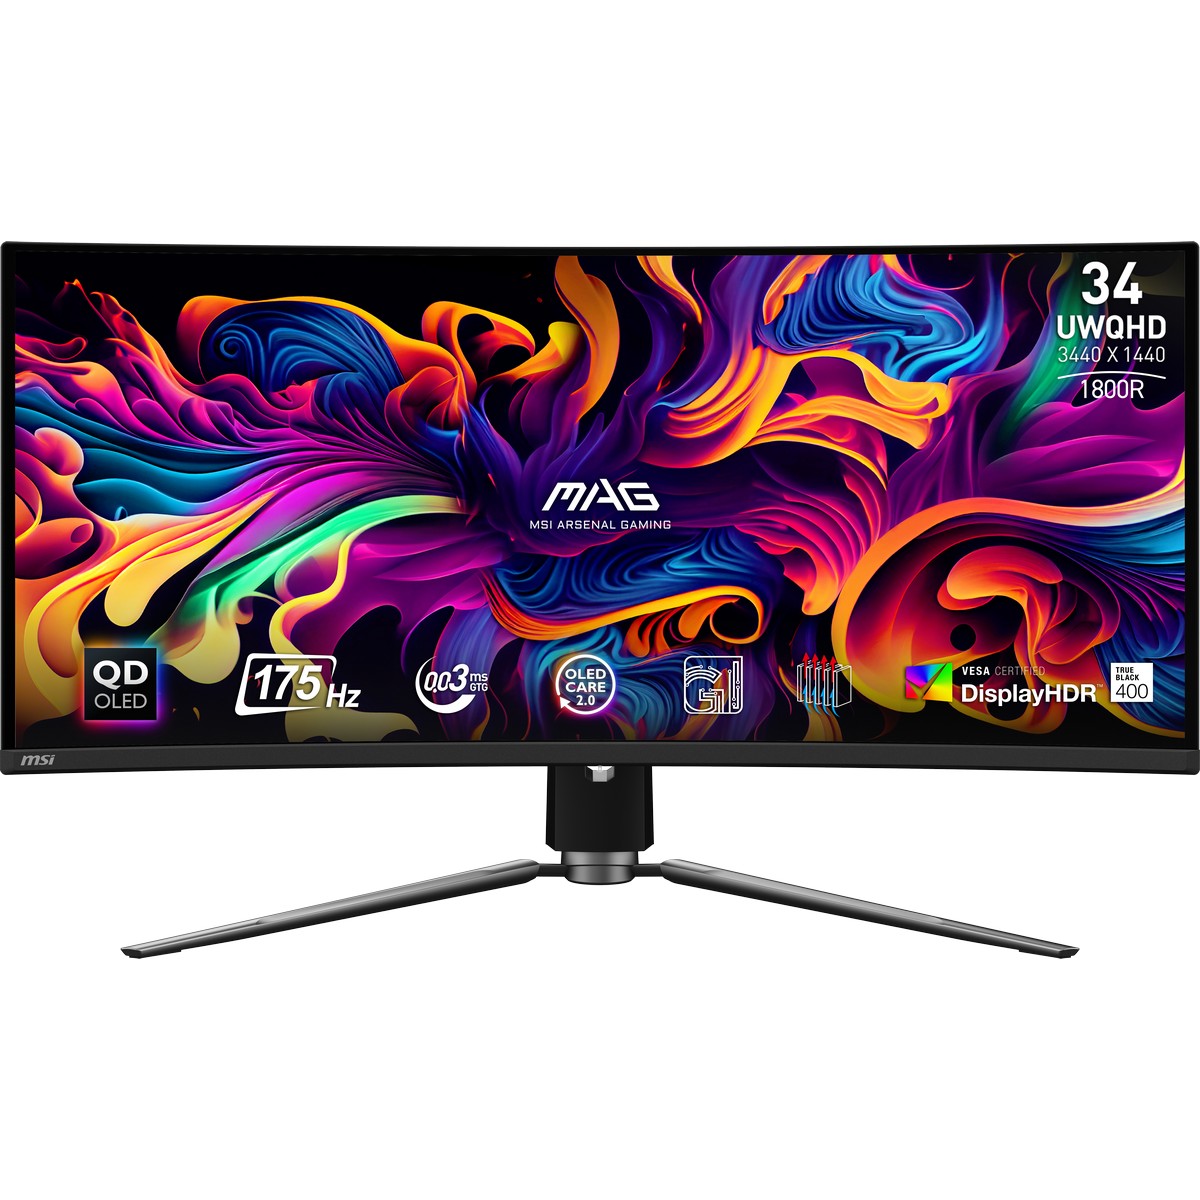 Monitors with OLED Technology